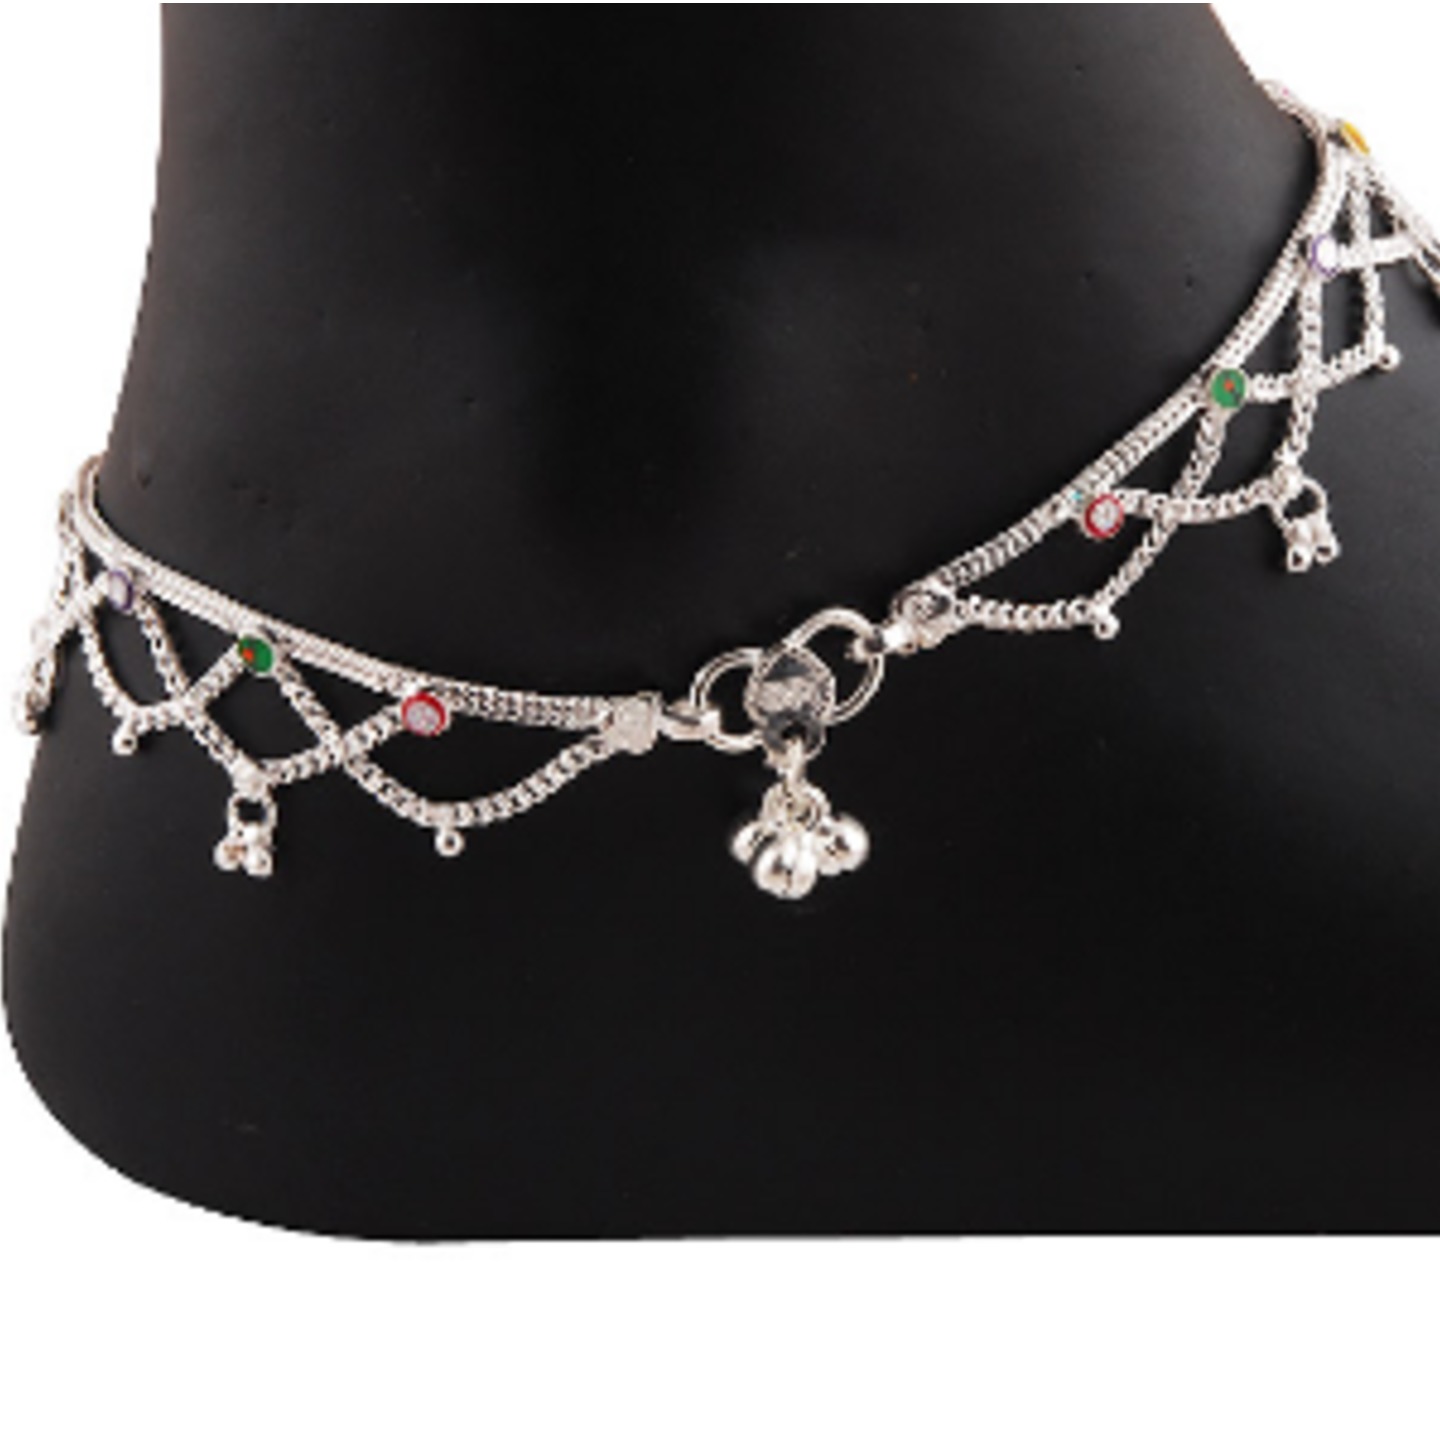 SILVER CROSS ANKLET